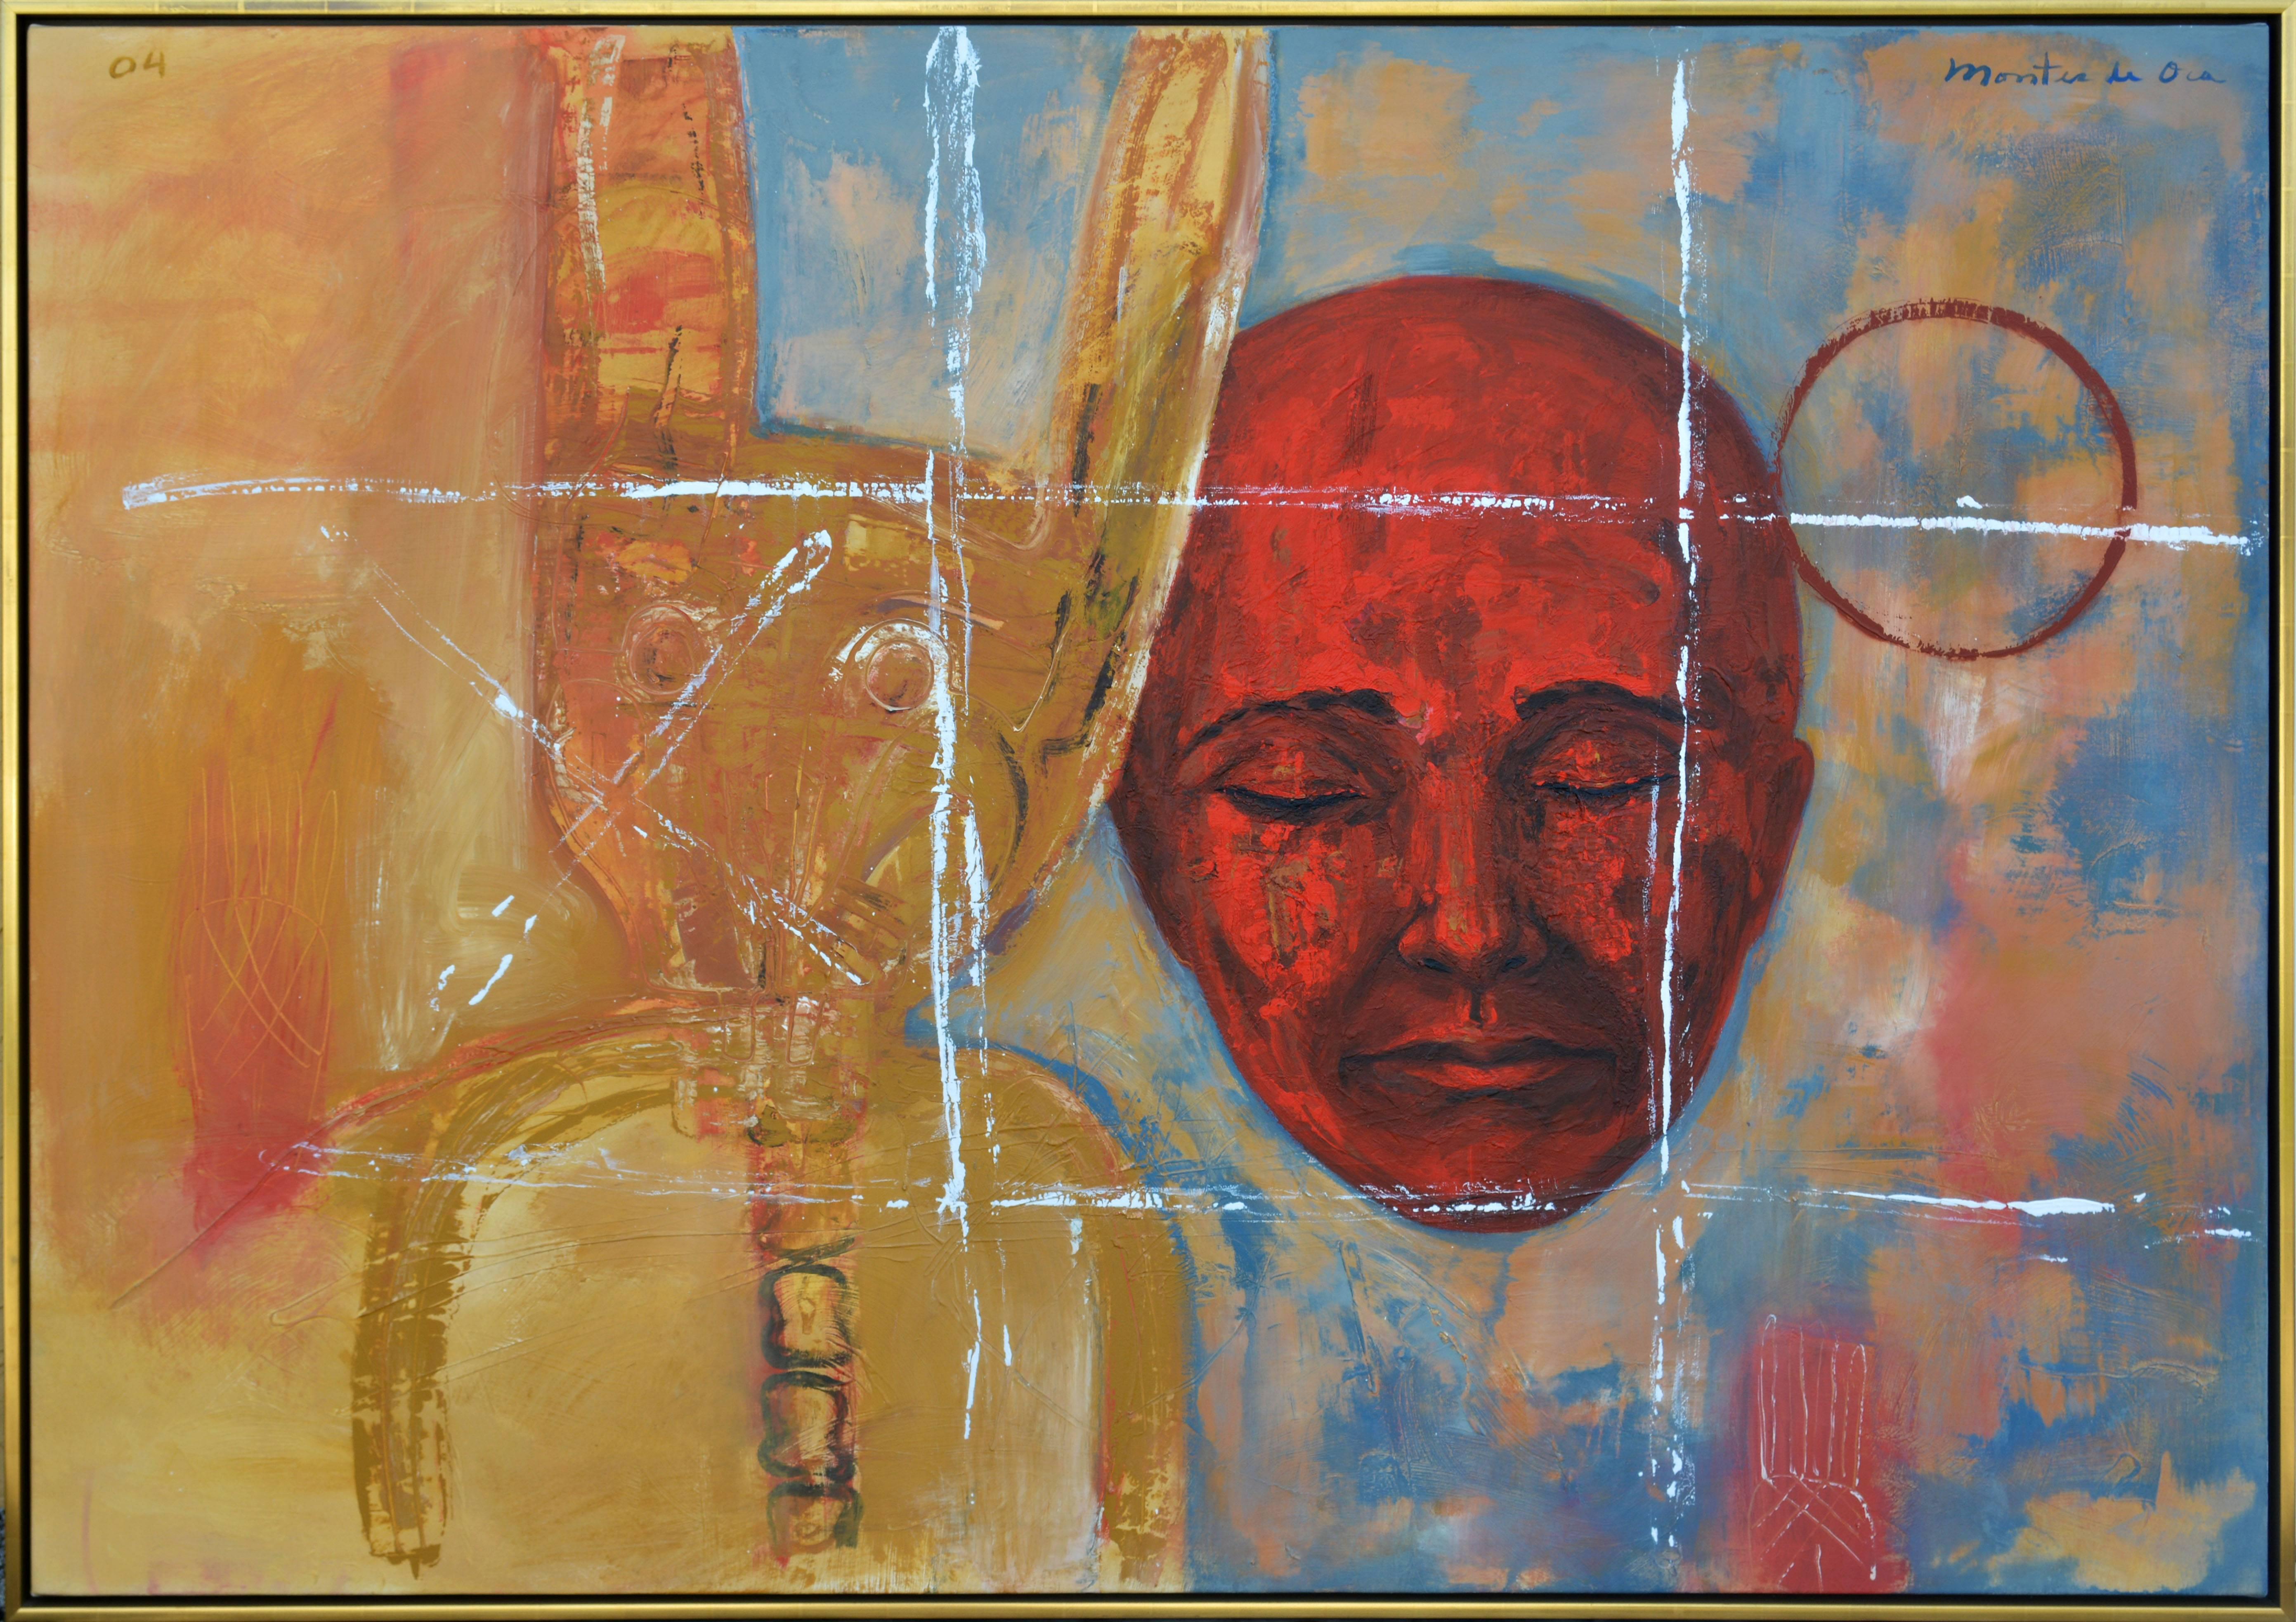 'Equilibrio'
by Carlos Montes de Oca, Cuban b. 1968.
57 x 98 in. without frame, 59 x 100 in. including frame, oil on canvas, signed on the front, inscribed, titled and dated 2004 by the artist on the back.
Gold leaf modern floater